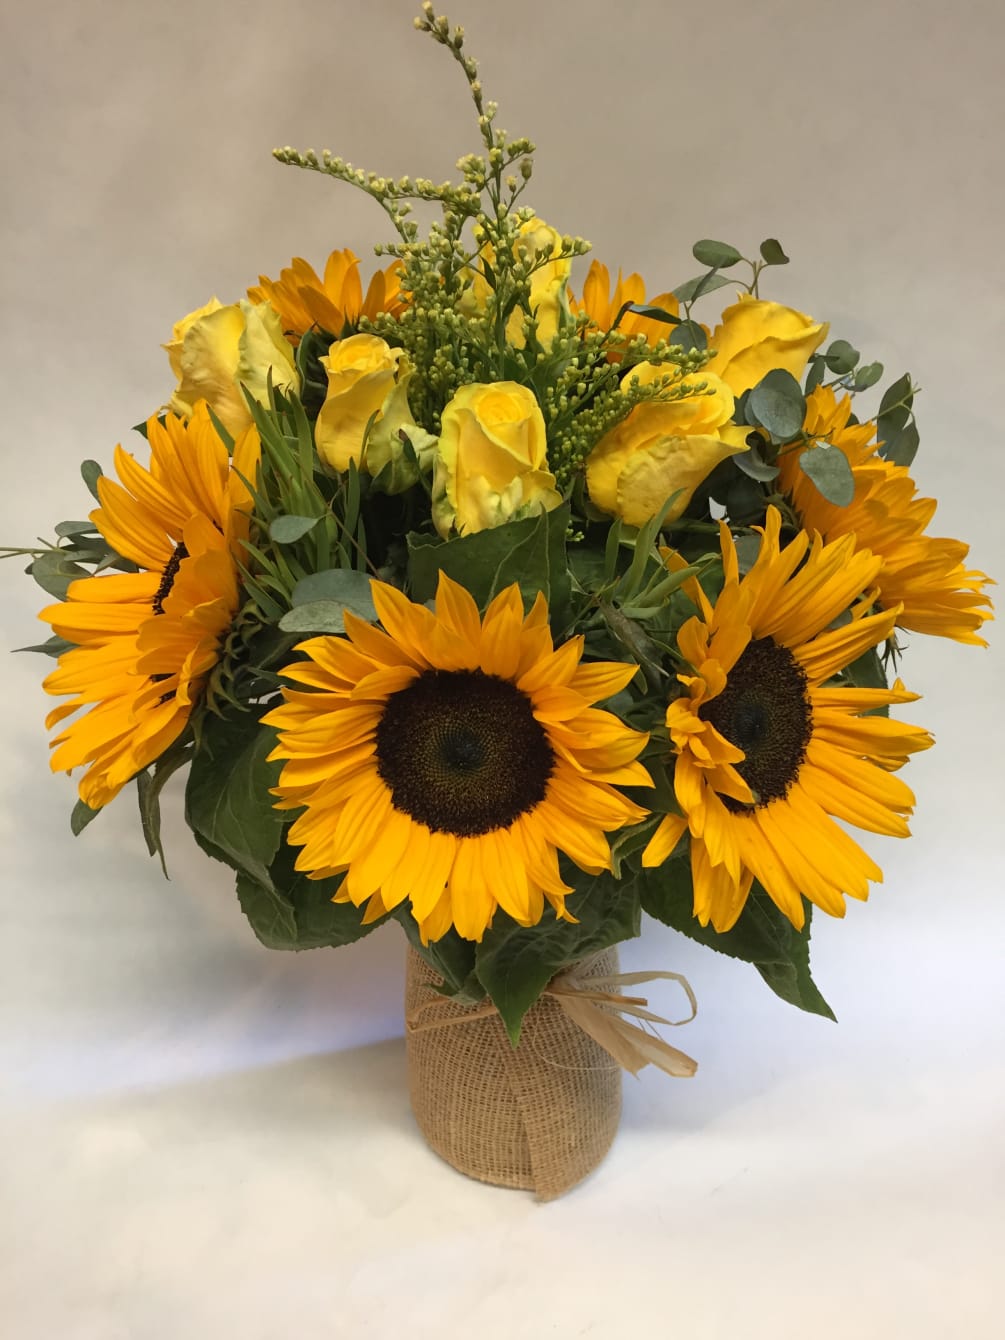 This bright and sunny arrangement comes complete with sunflowers, solidago, yellow roses